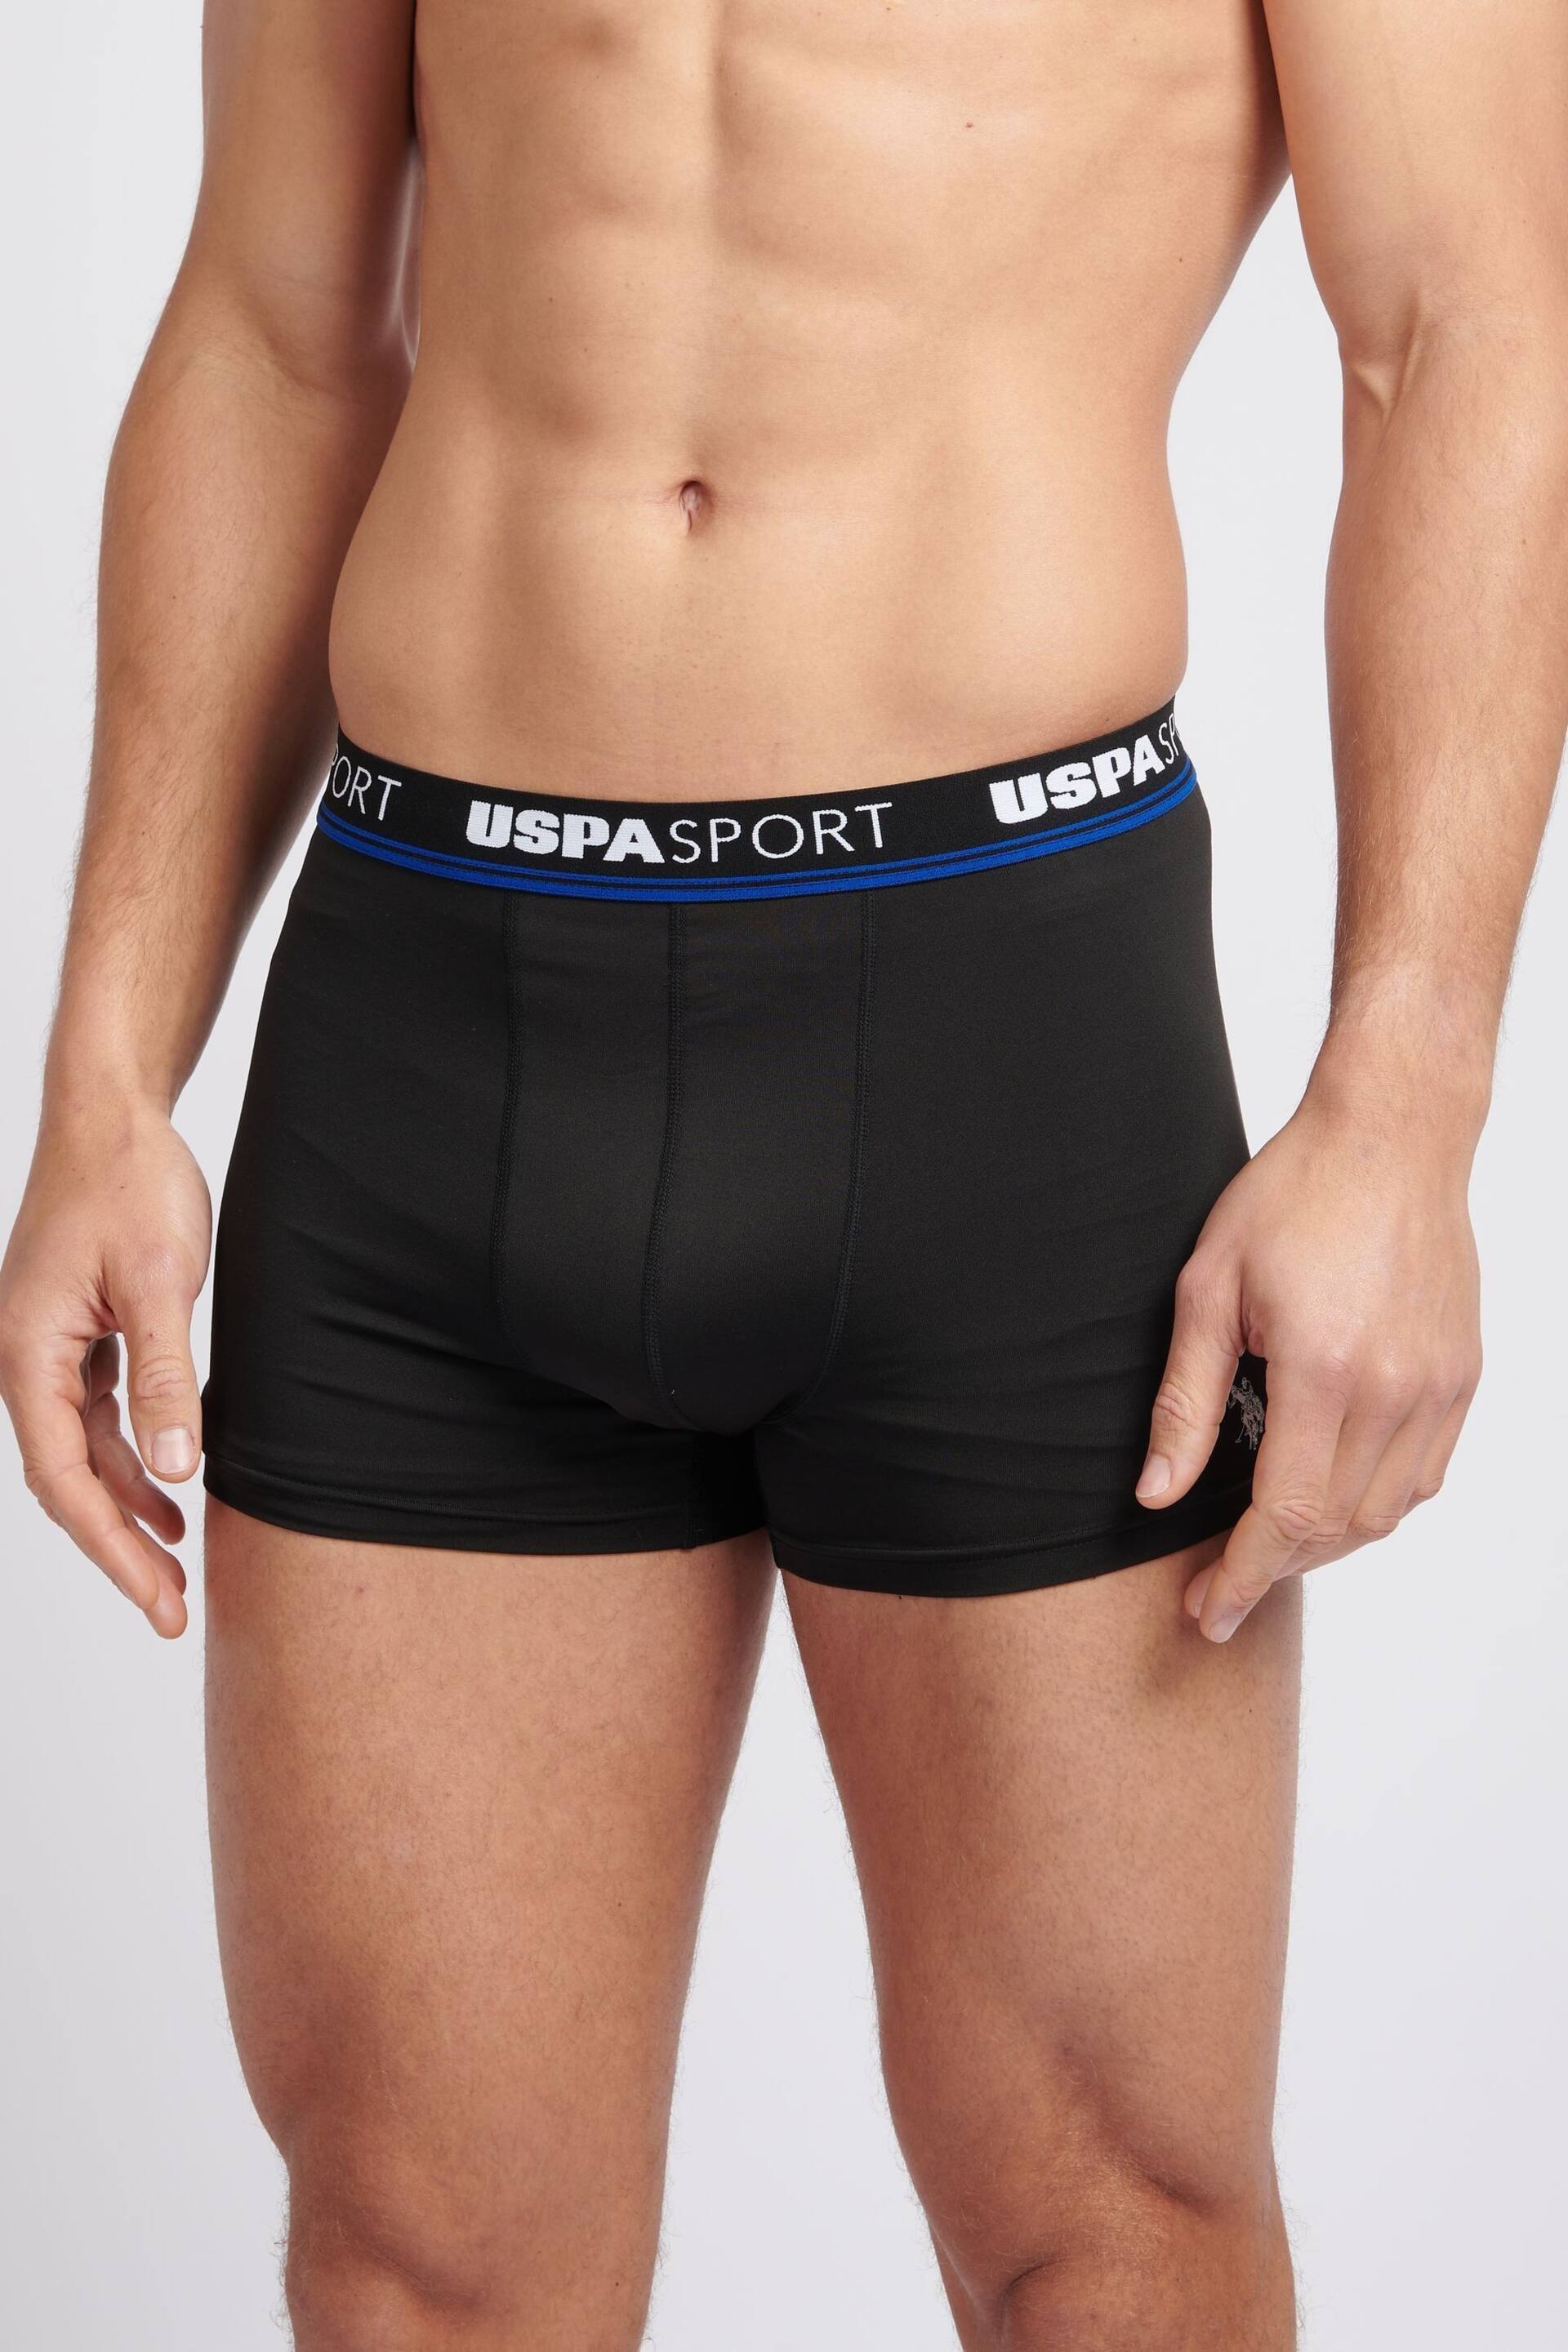 U.S. Polo Assn. Mens Sports Boxer Black Shorts 3 Pack - Image 4 of 8